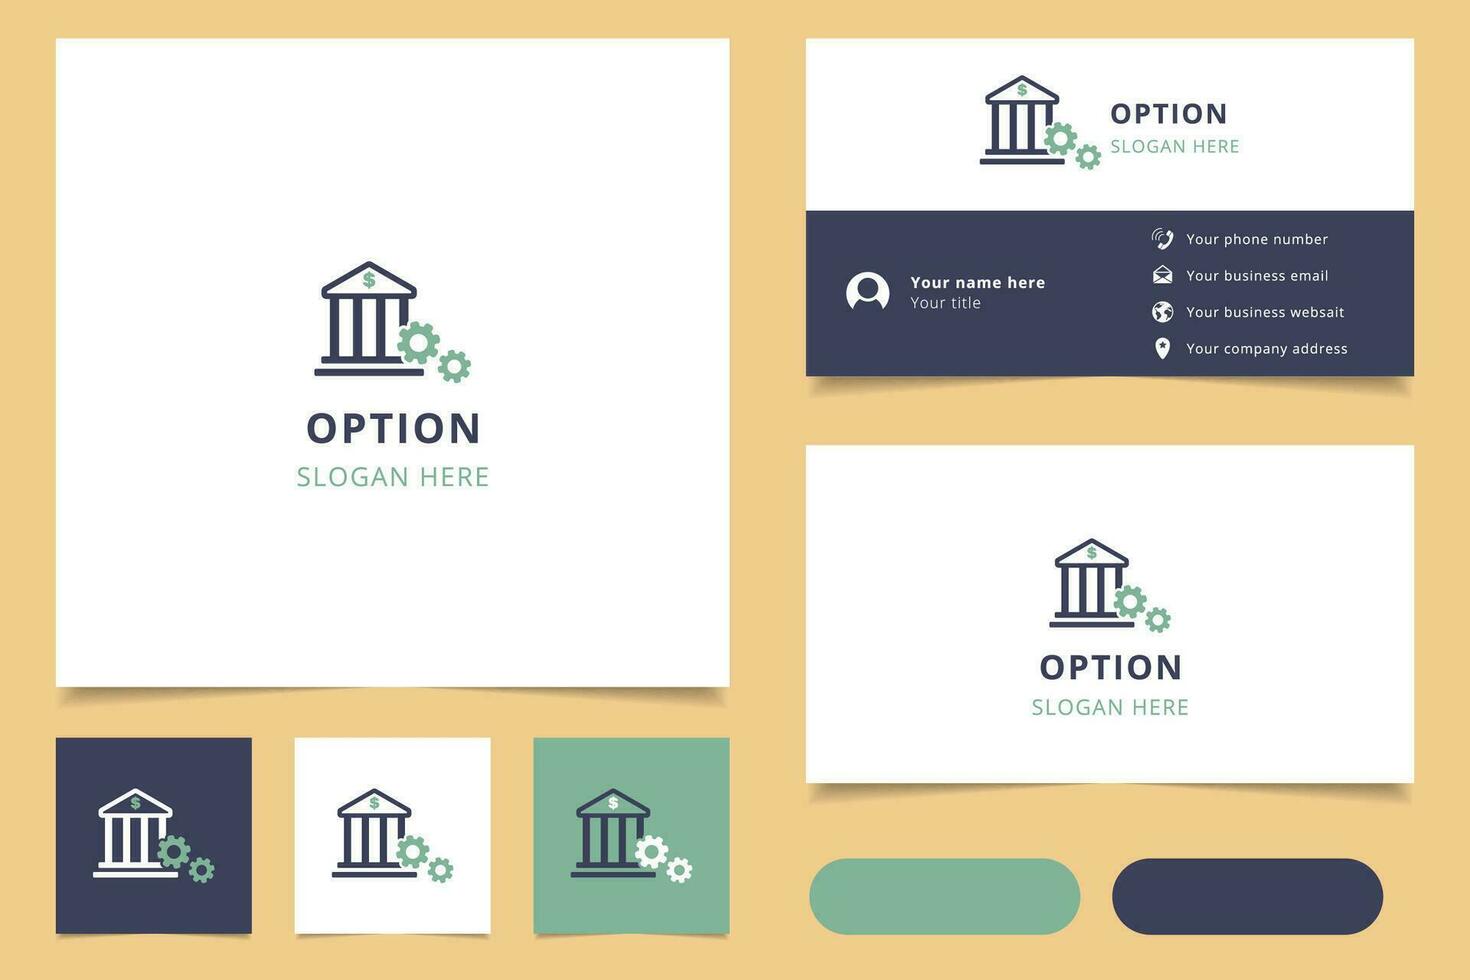 Option logo design with editable slogan. Branding book and business card template. vector